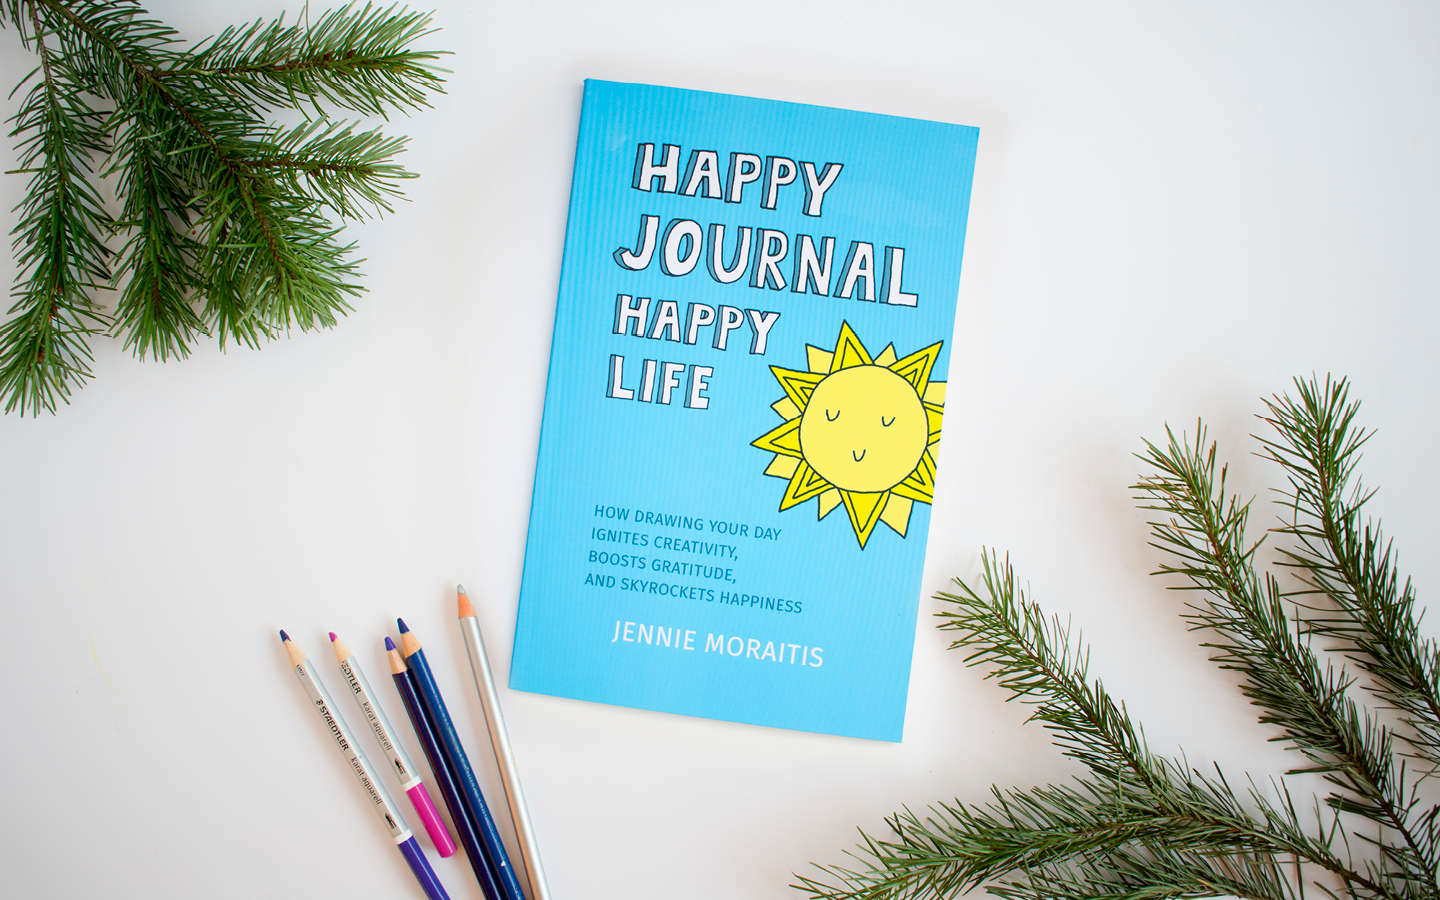 Get the Happy Journal Happy Life paperback book